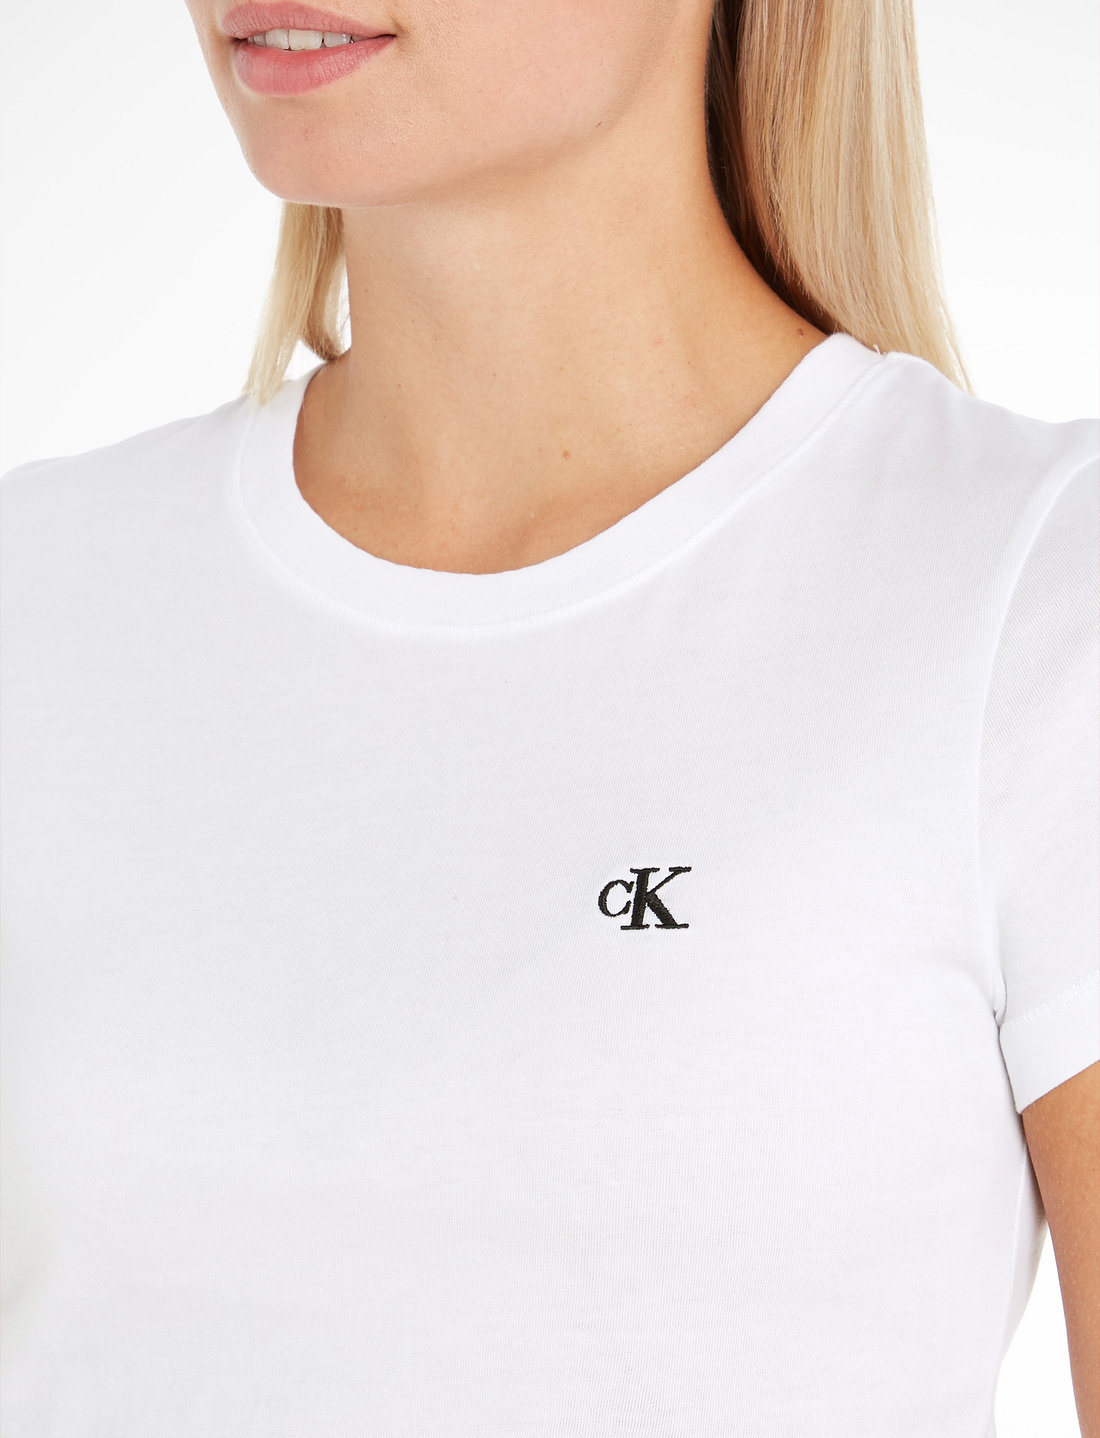 Calvin Klein Jeans Ck Embroidery Slim Tee - T-shirts